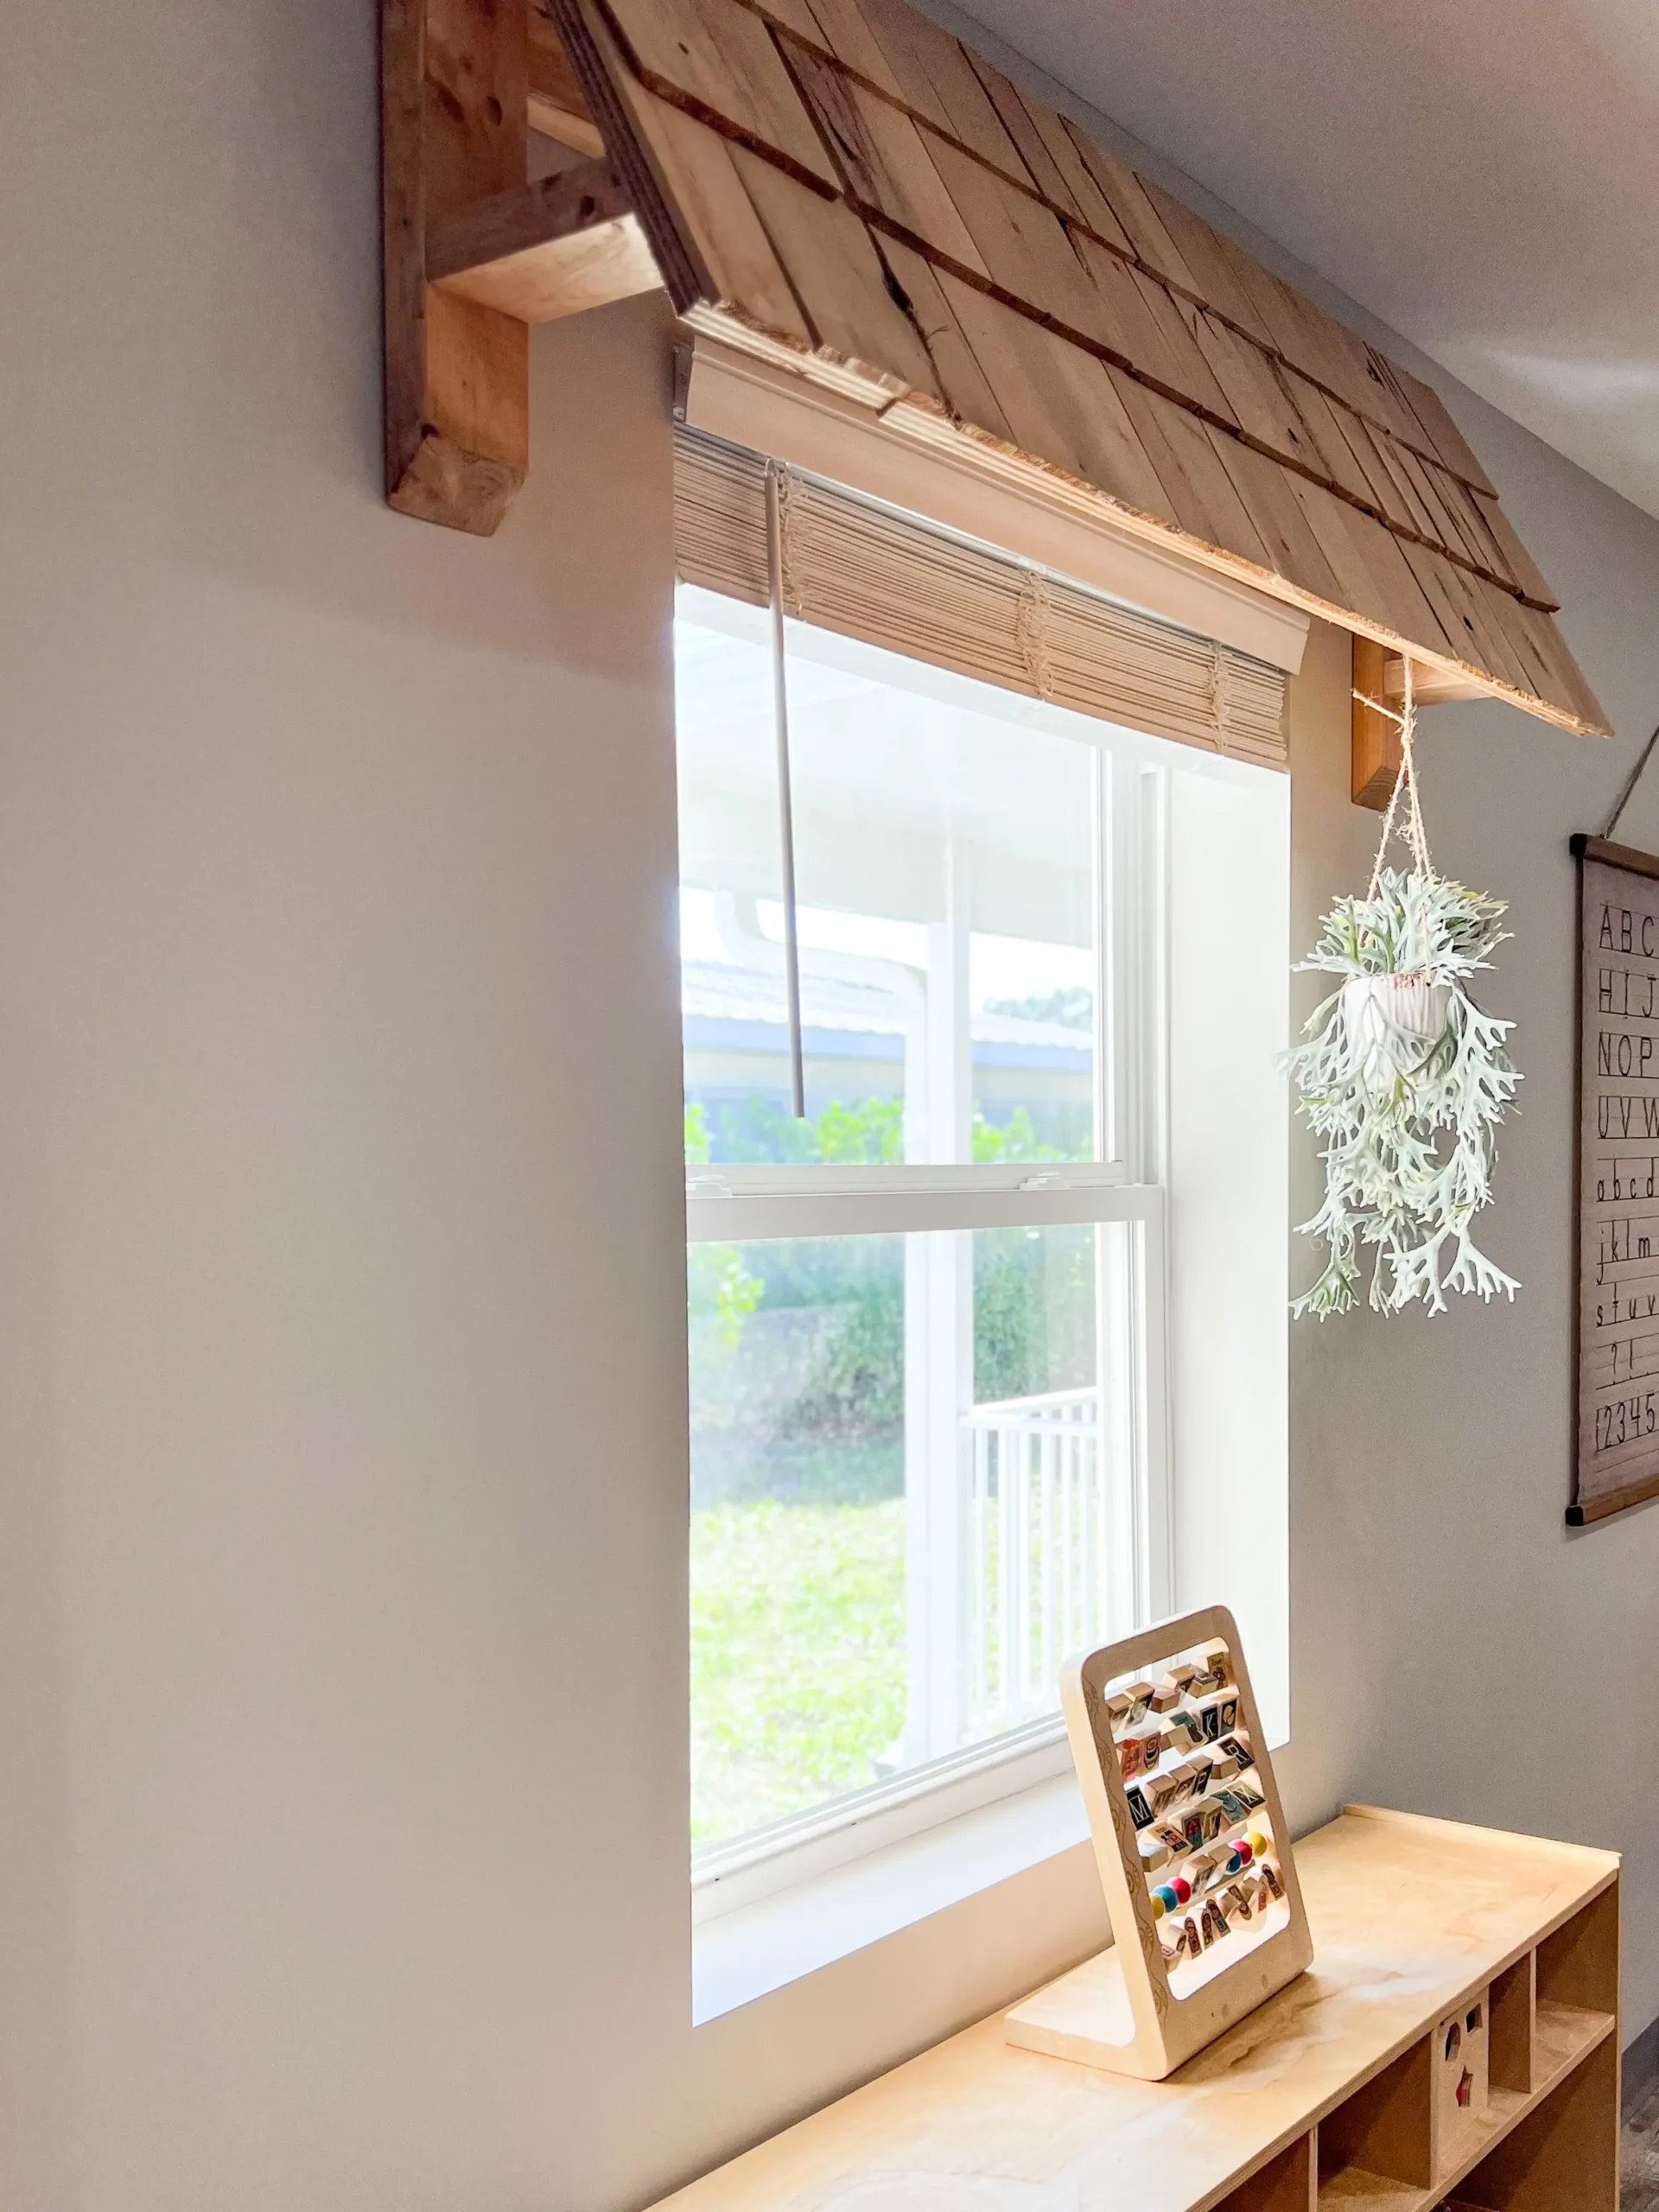 adorable wooden awning over the windows in a neutral classroom